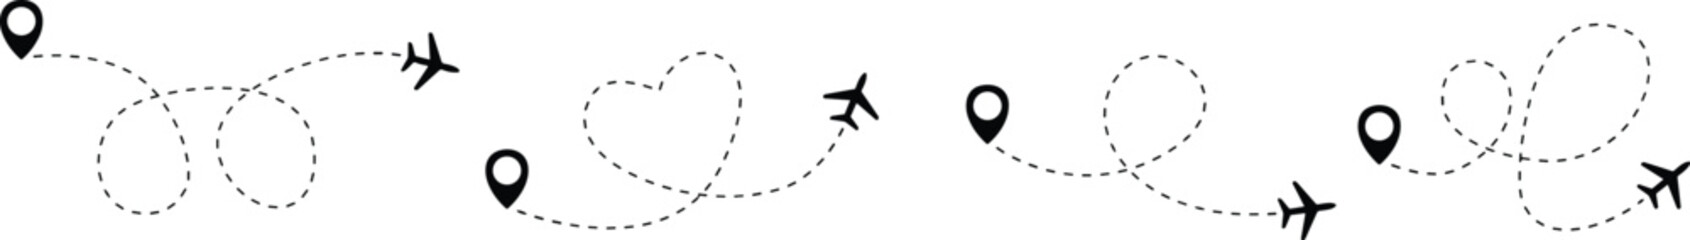 Airplane line path vector icon set of air plane flight route with start point and dash line trace. Various aircraft and destination location pins icons. Aircraft tracking, planes, travel, map